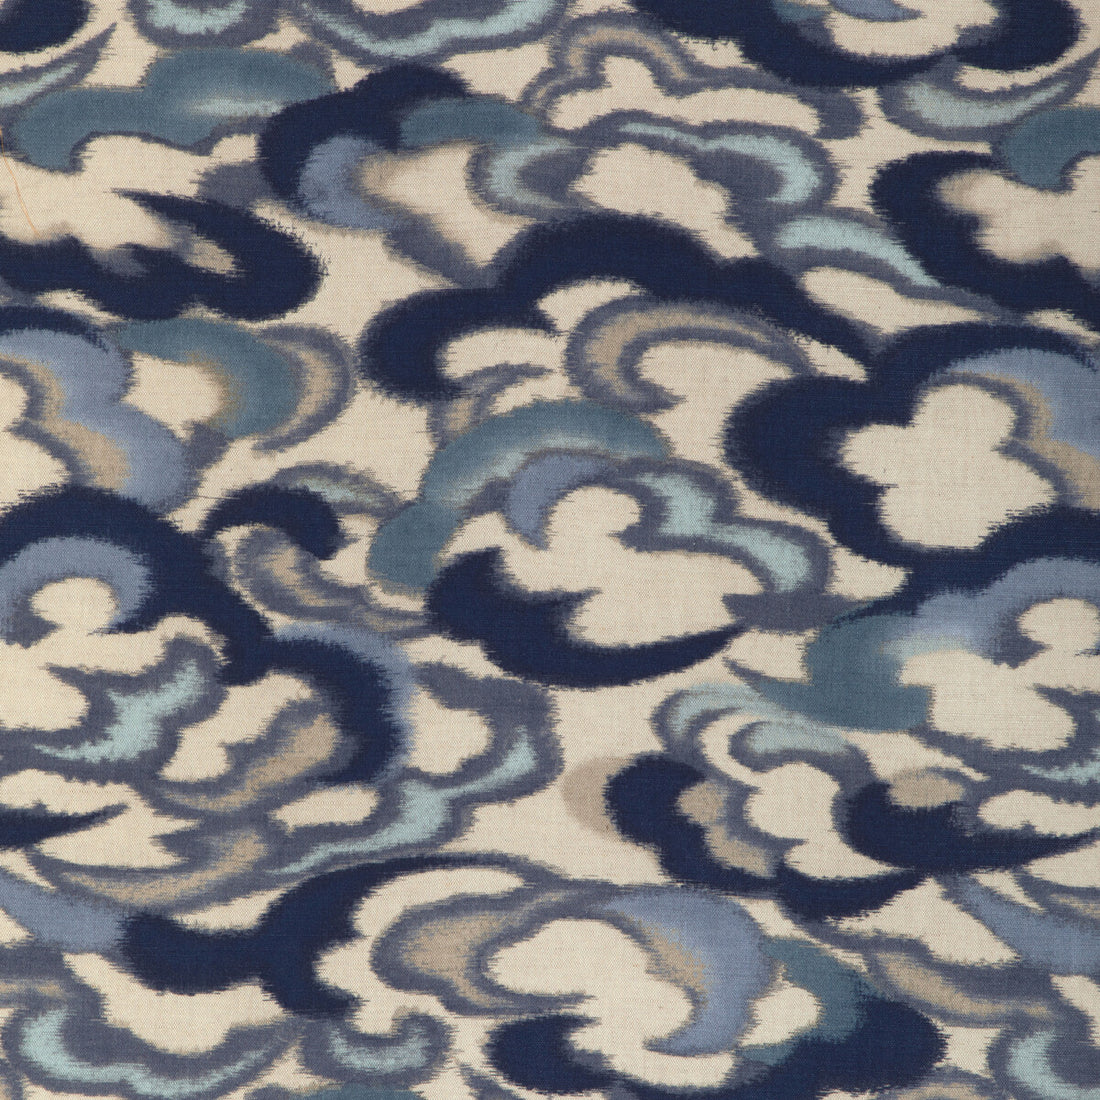 Stratus Print fabric in sky/lapis color - pattern 8023138.155.0 - by Brunschwig &amp; Fils in the Celeste collection